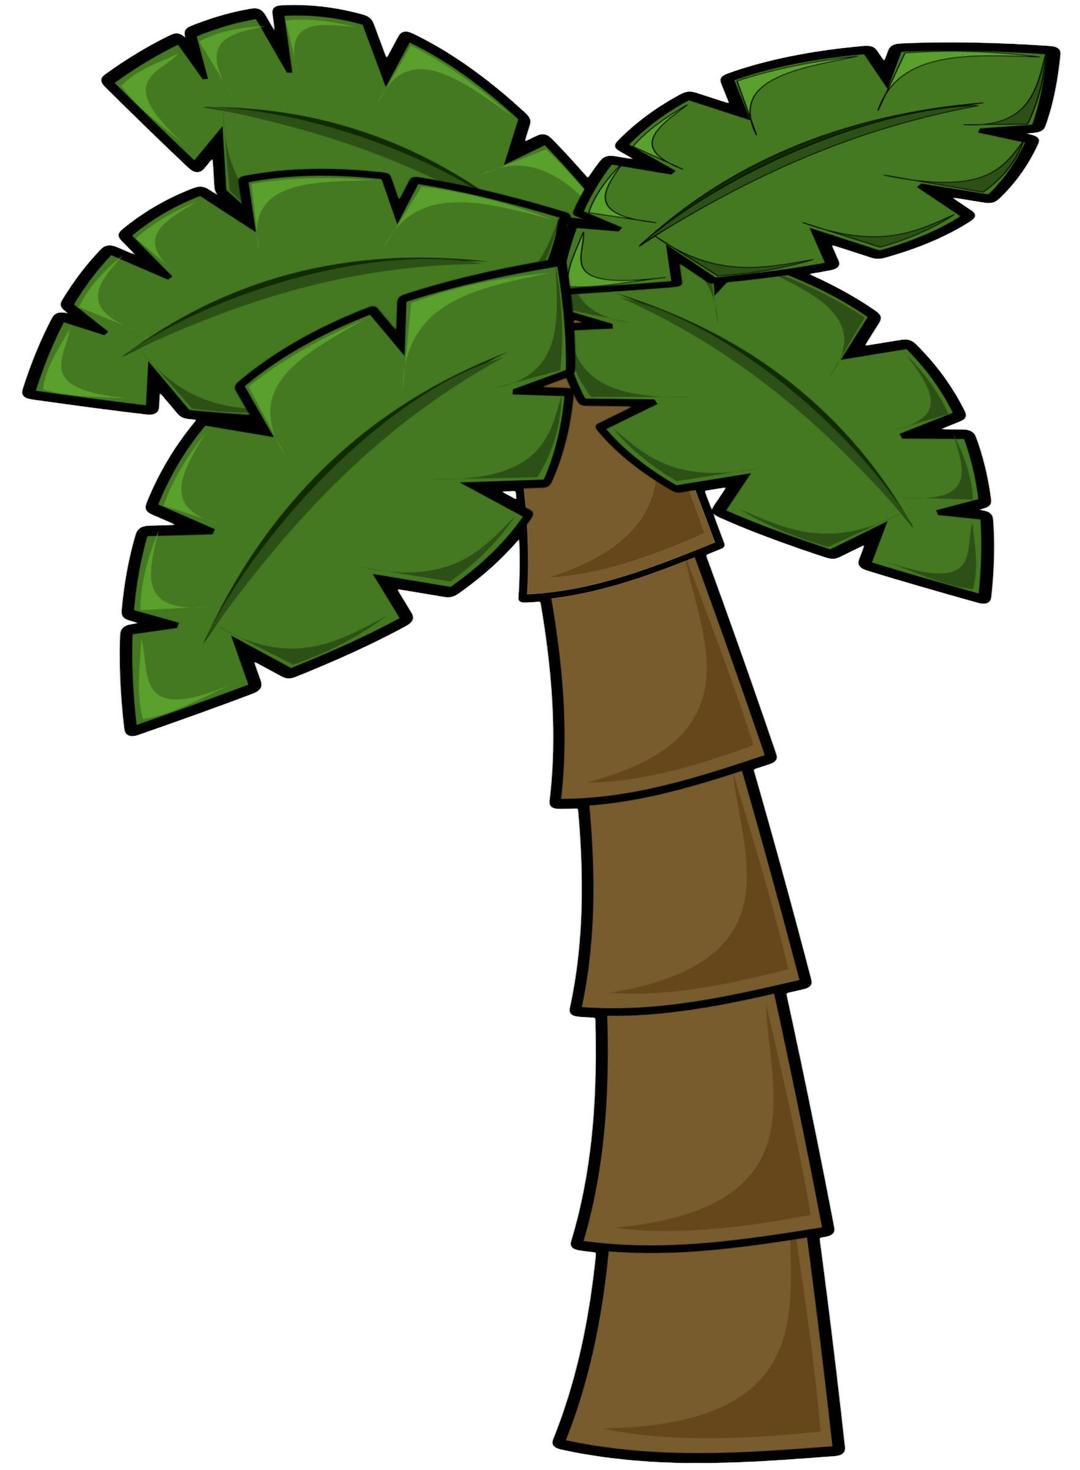 Brighter palm tree png transparent